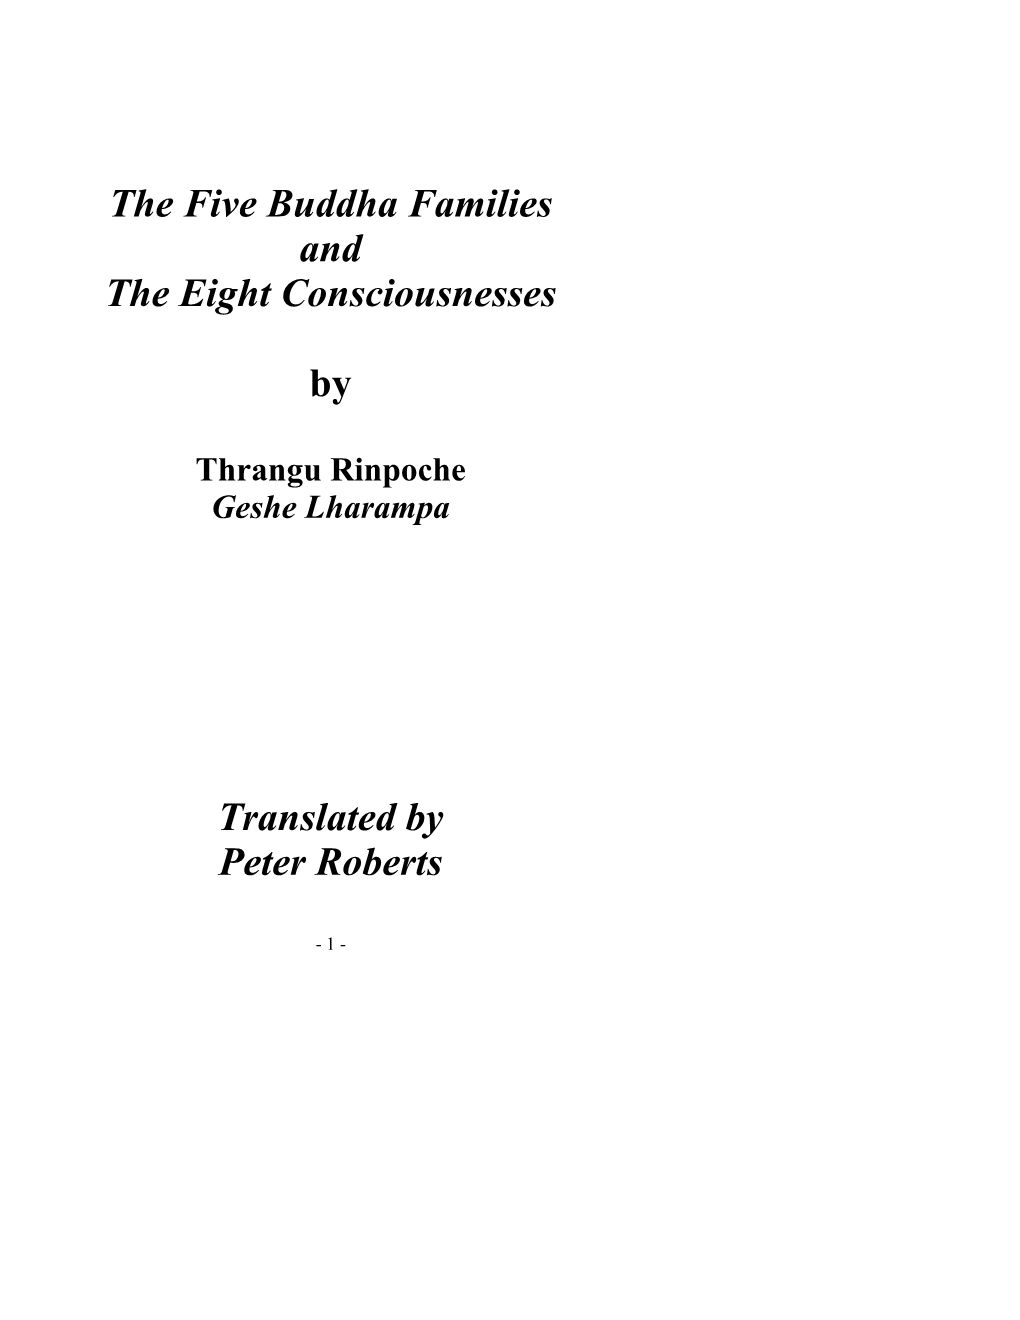 The Five Buddha Families and the Eight Consciousnesses